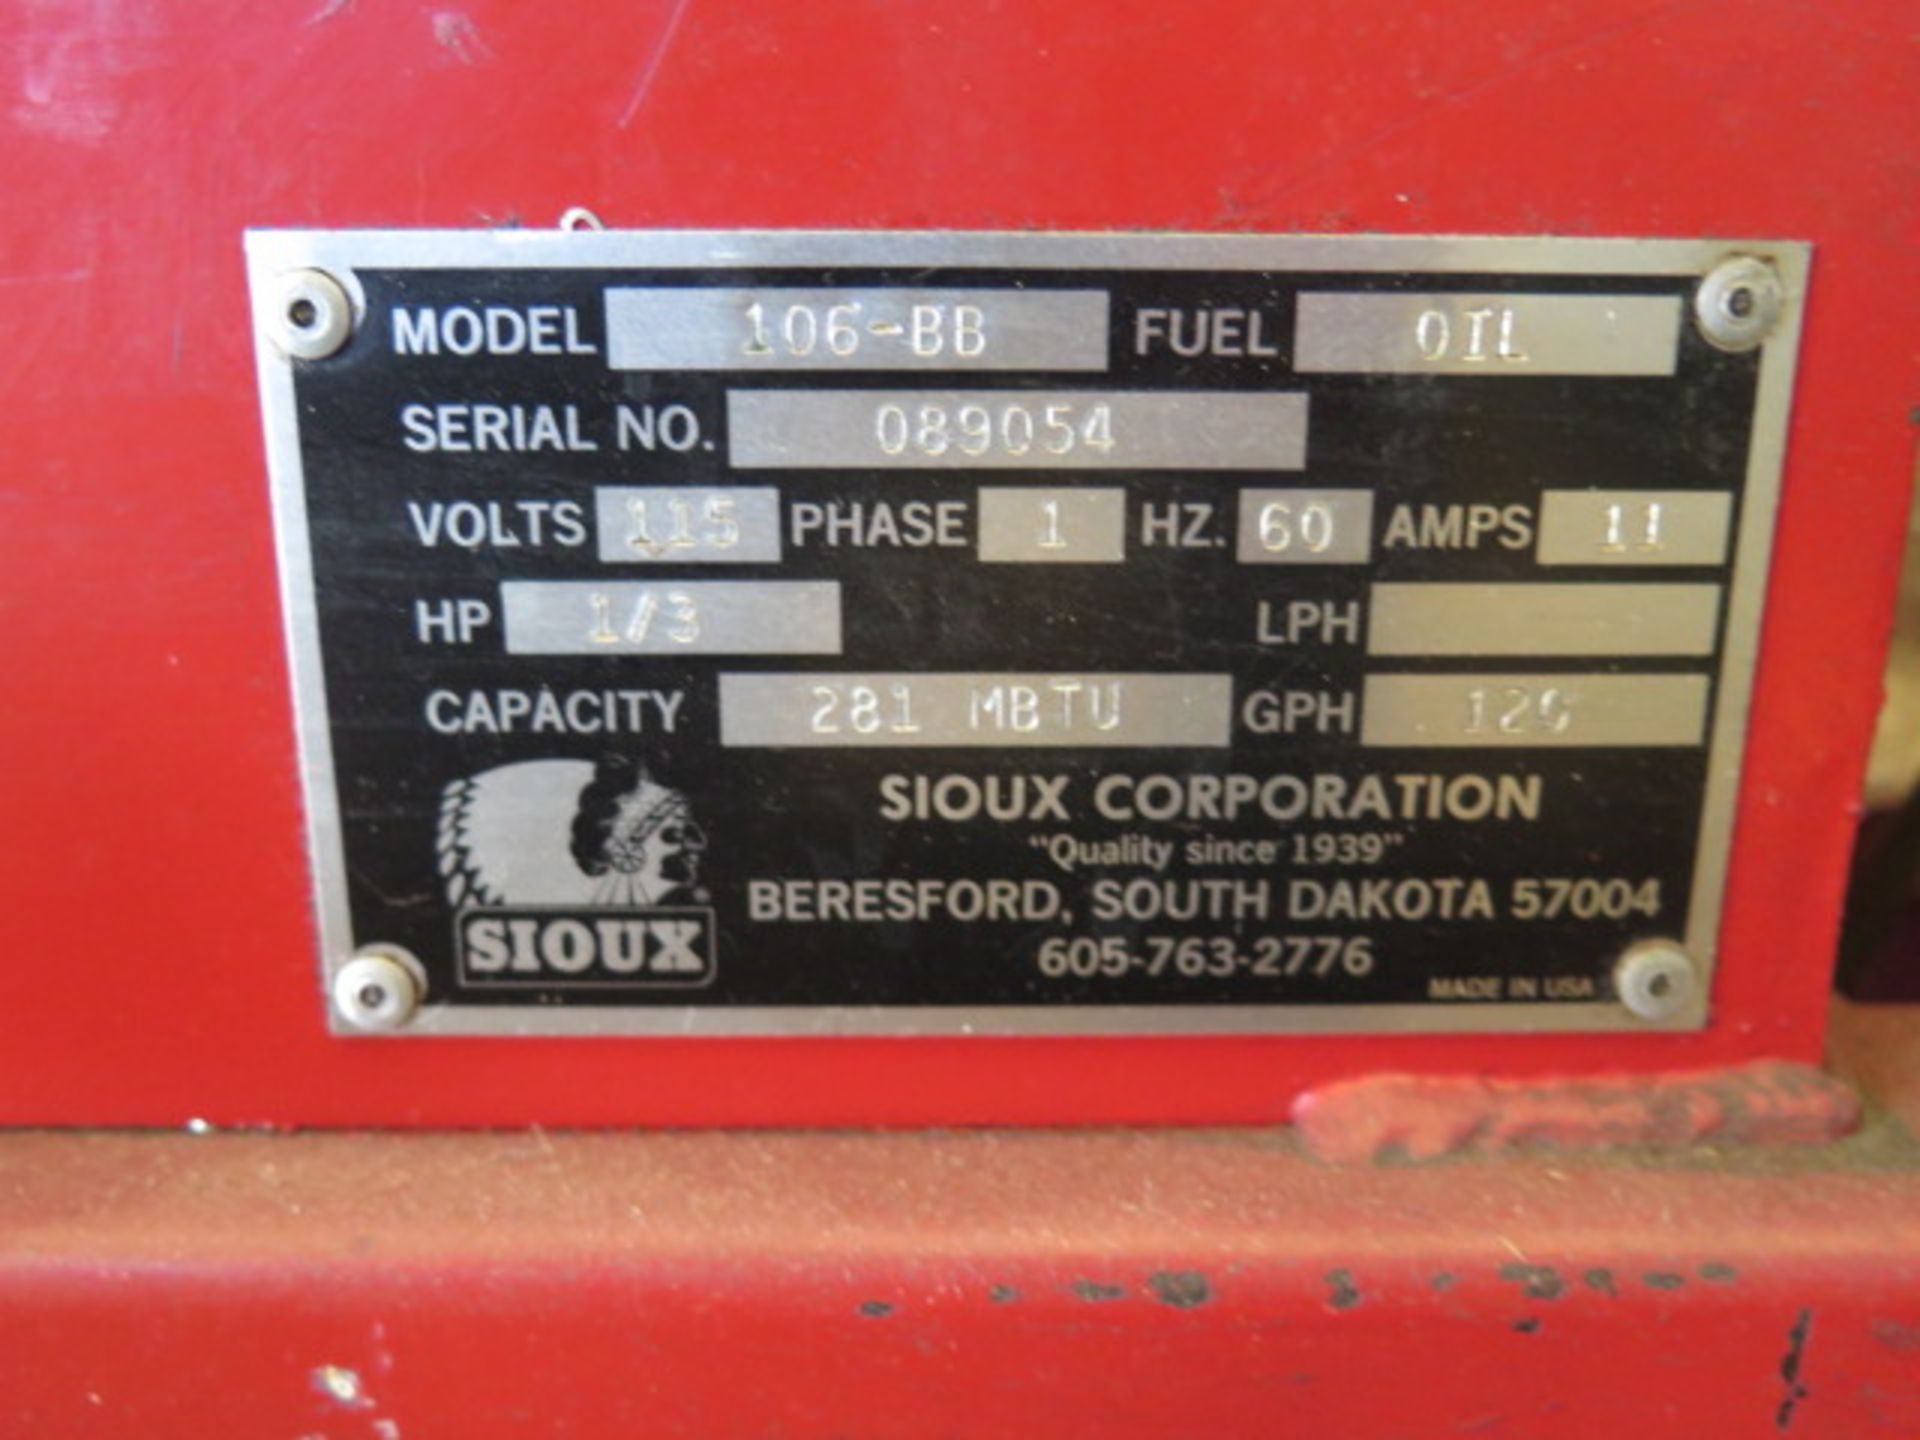 Sioux mdl. 106-BB Oil Fired Pressure Washer s/n 089054 (SOLD AS-IS - NO WARRANTY) - Image 8 of 8